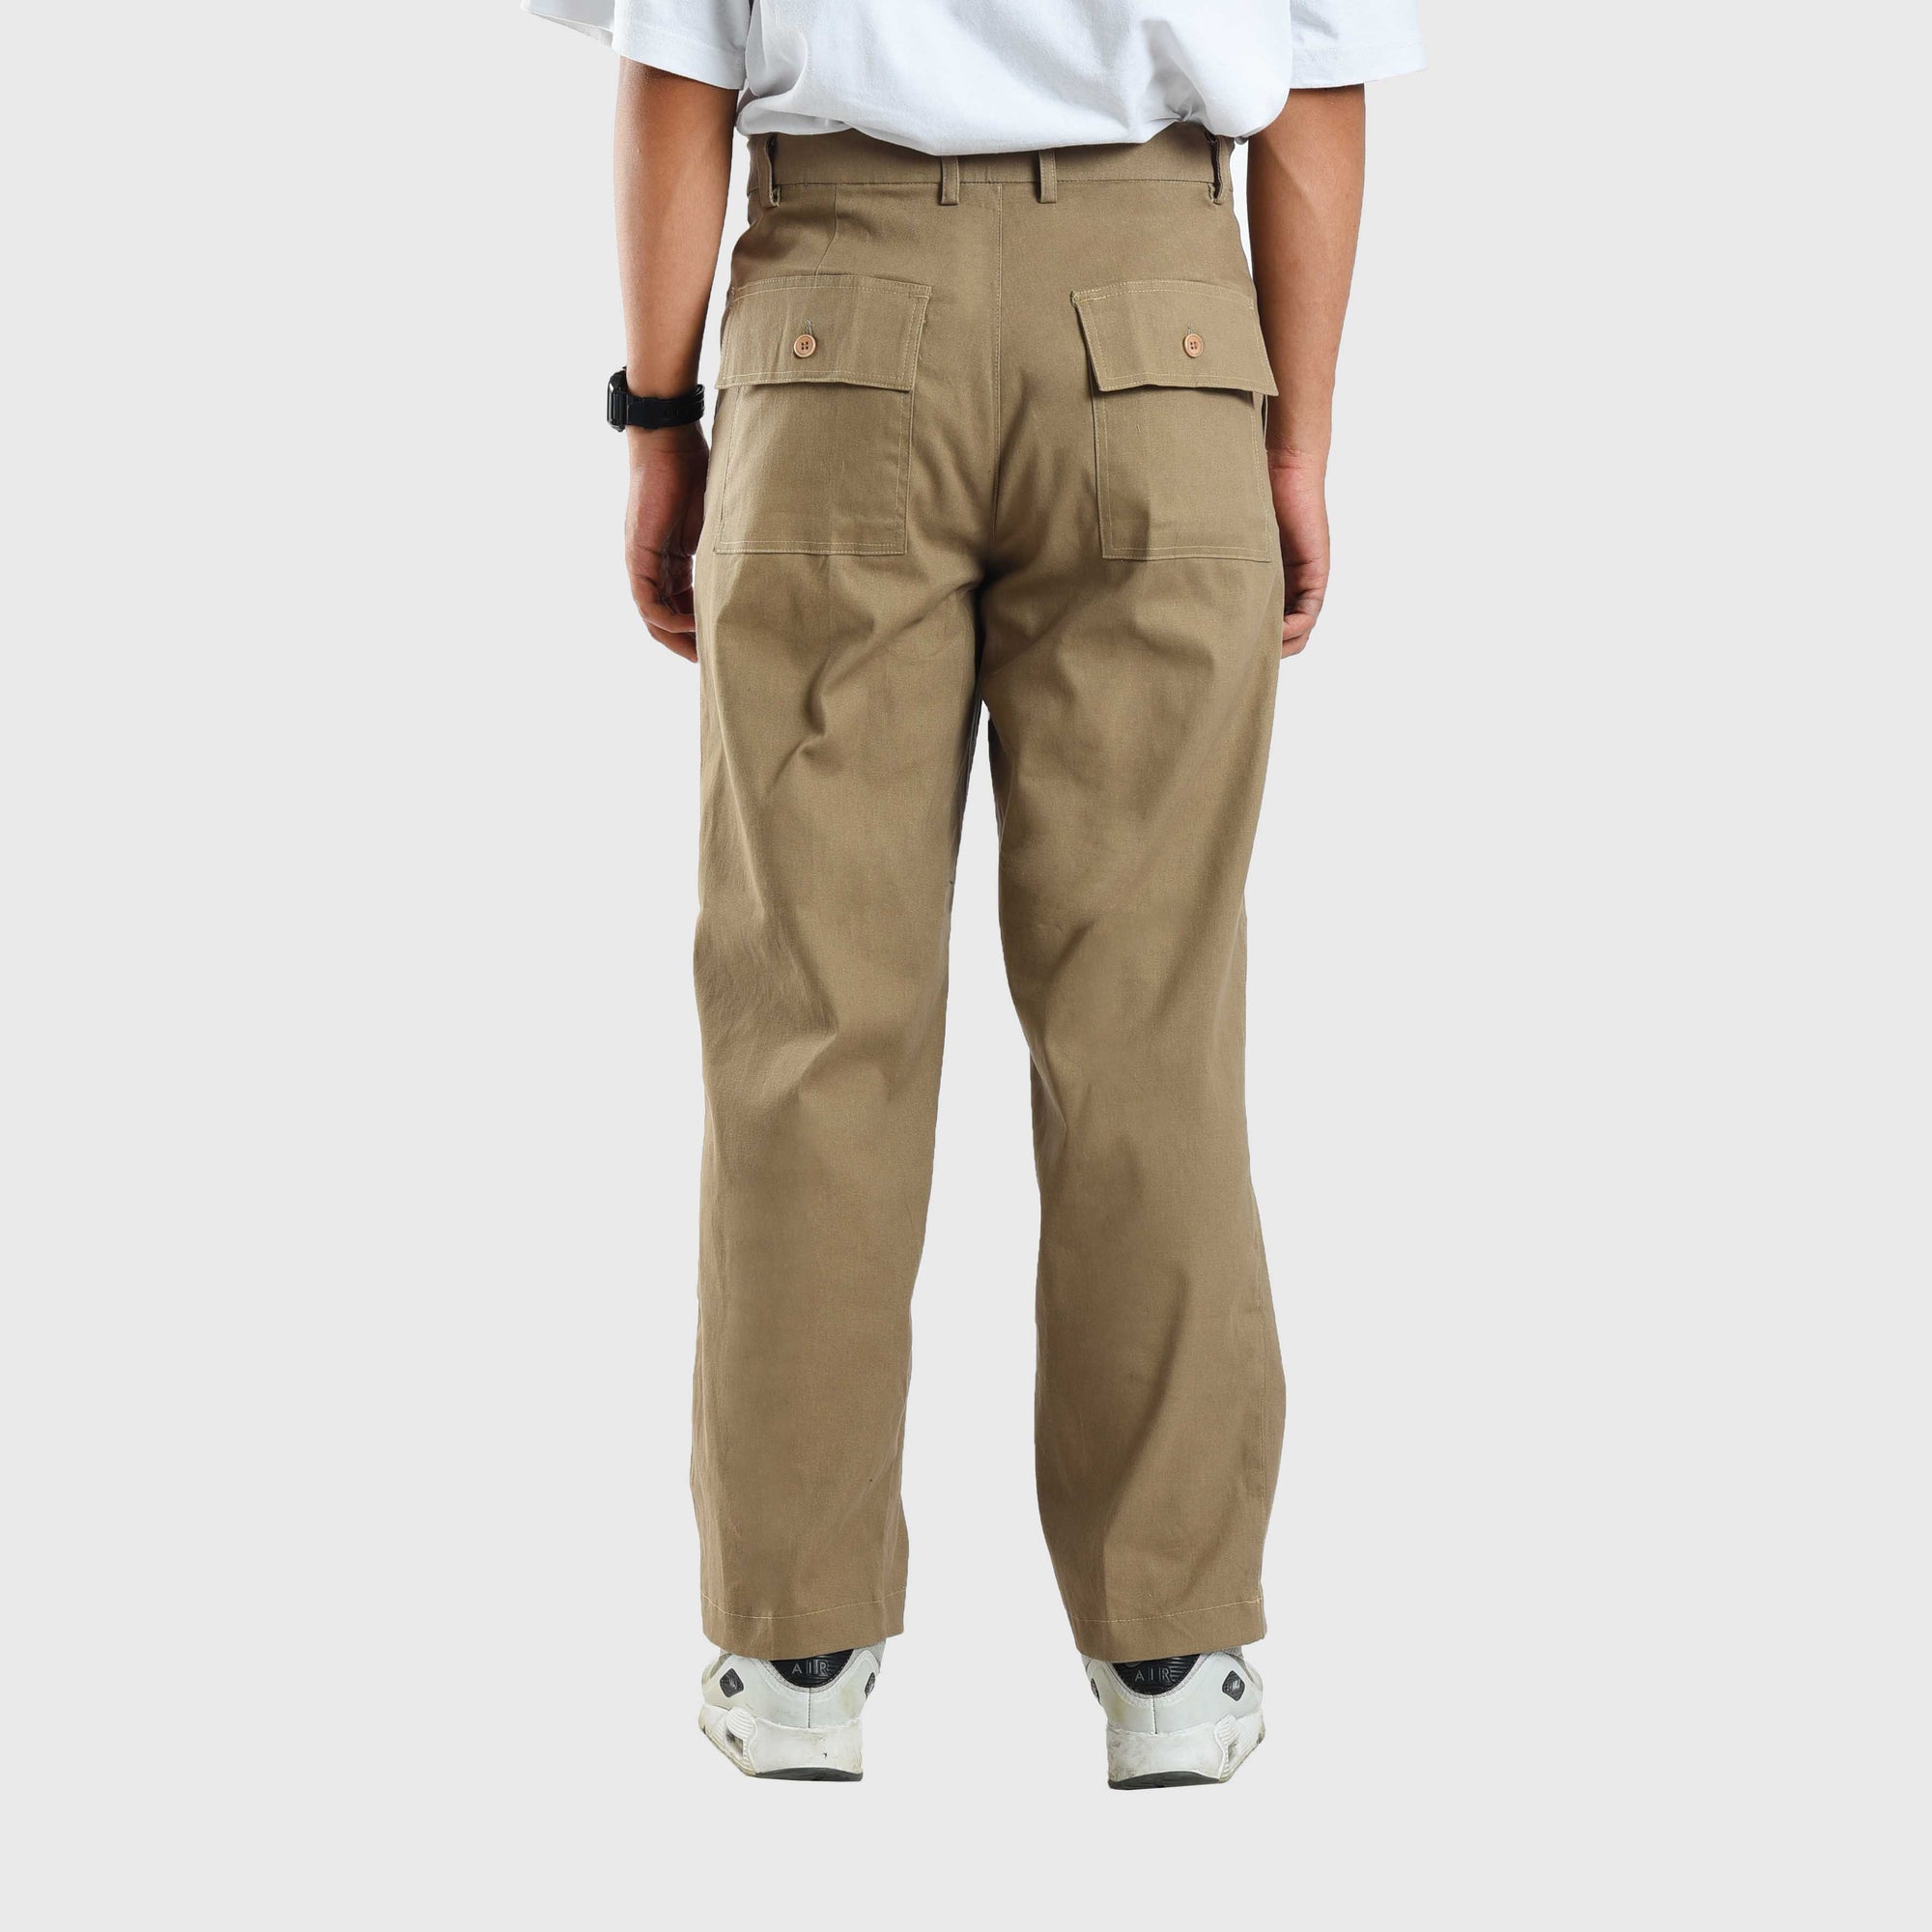 Roughneck C030 Dennery Fatigue Pants